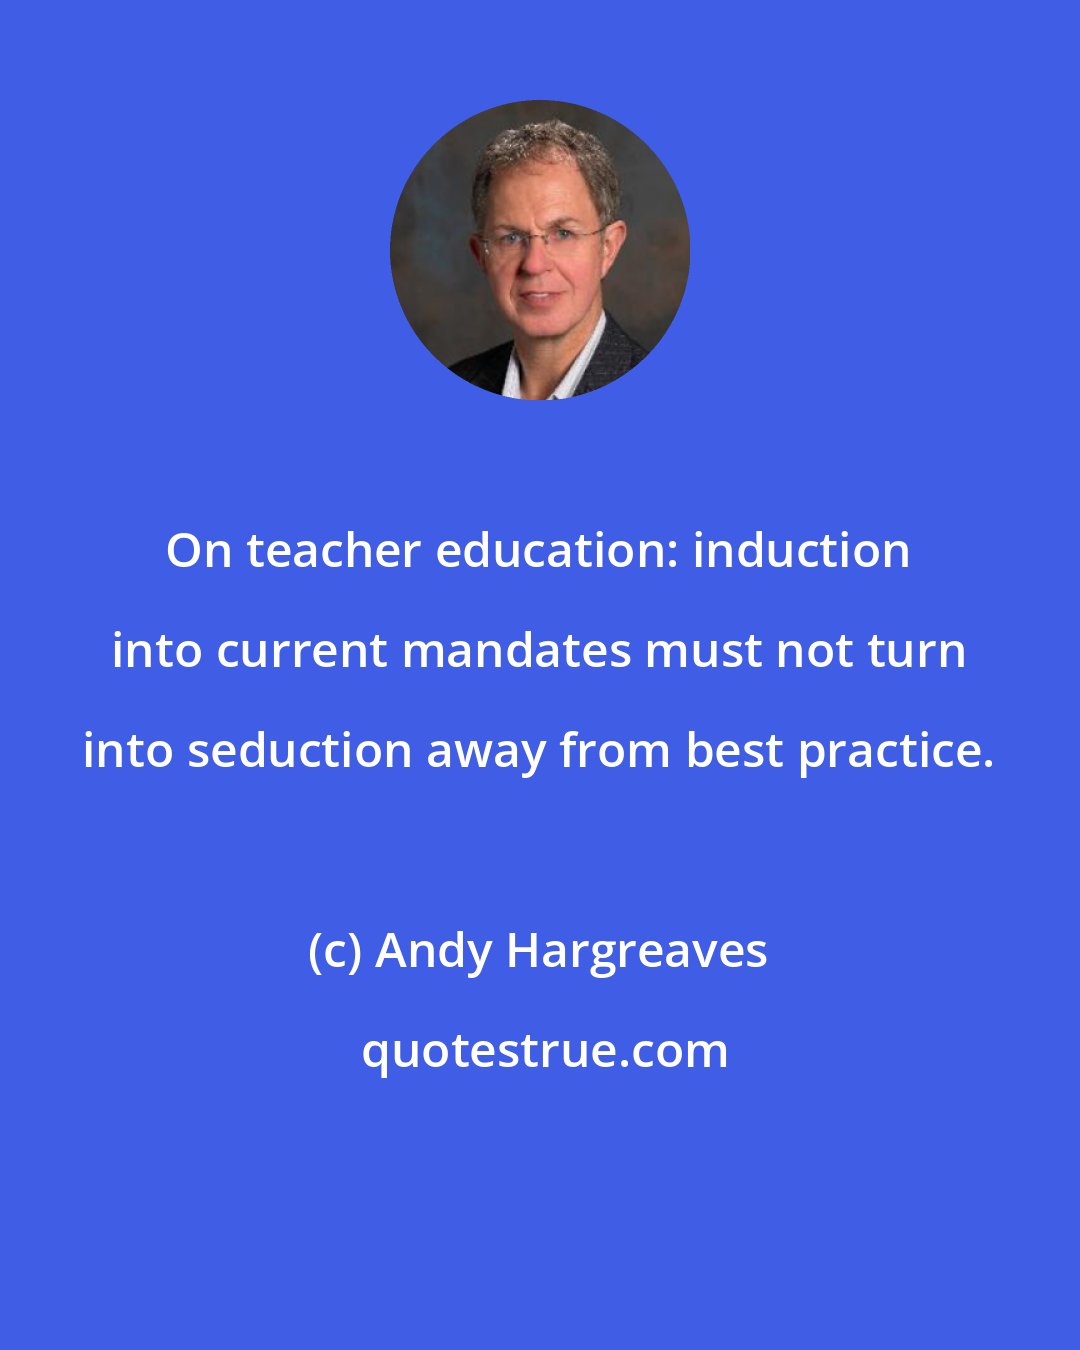 Andy Hargreaves: On teacher education: induction into current mandates must not turn into seduction away from best practice.